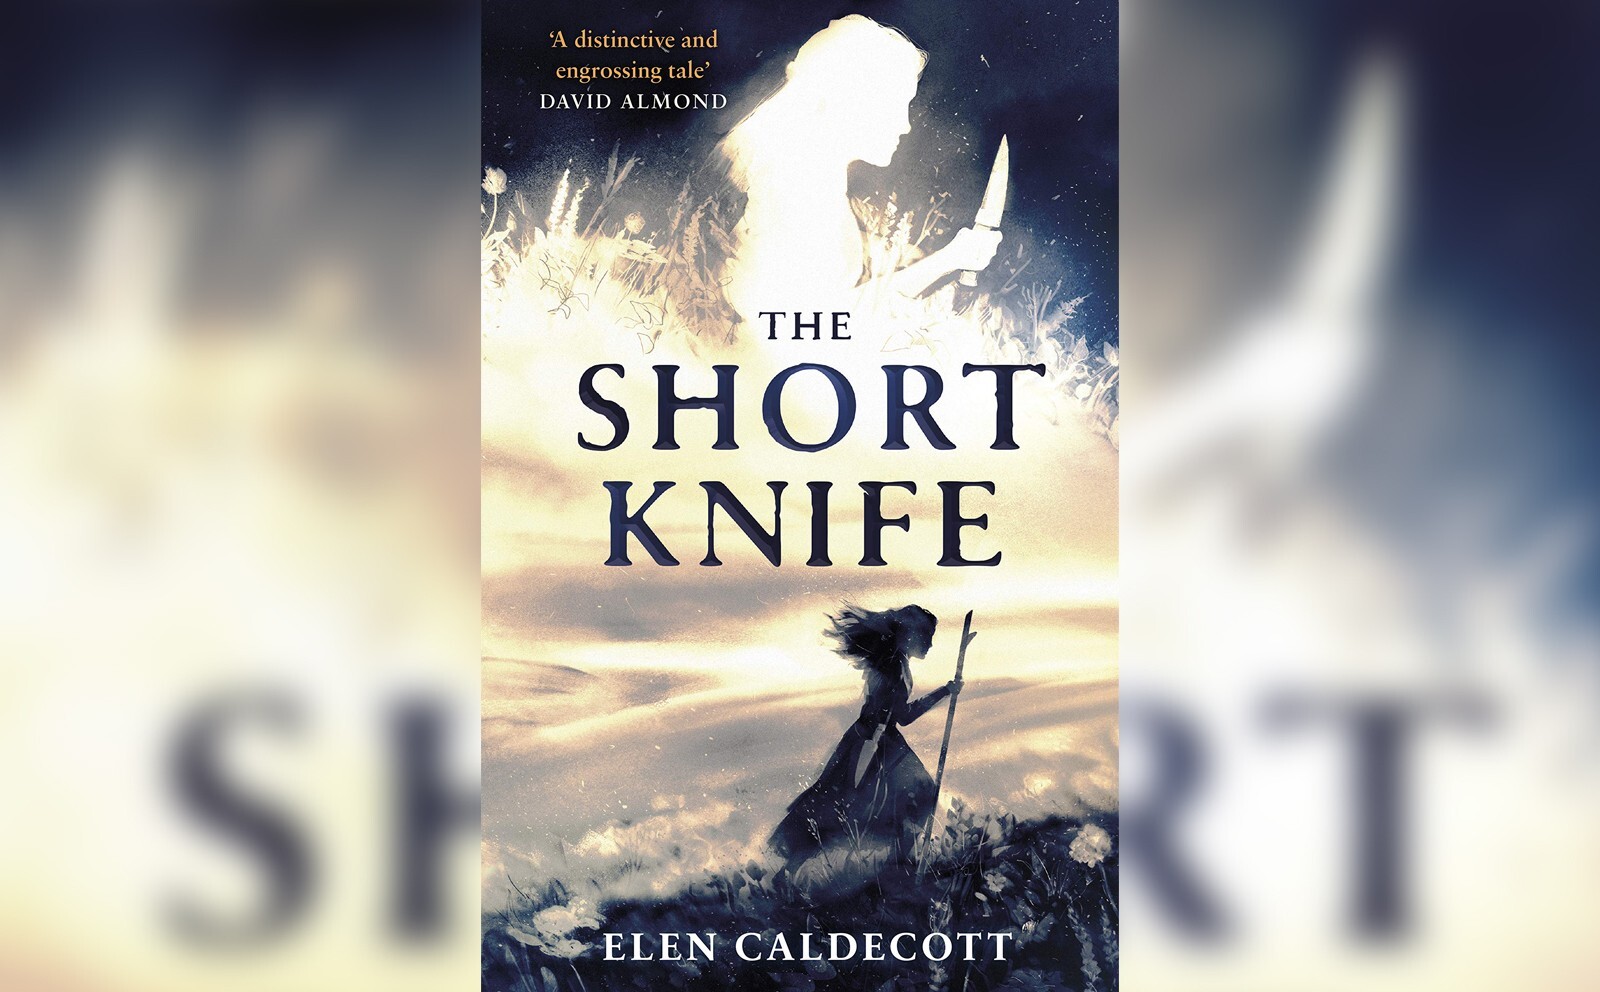 ‘The Short Knife’ is an absorbing piece of historical fiction that doesn’t sugarcoat the dystopian landscape of the Dark Ages.